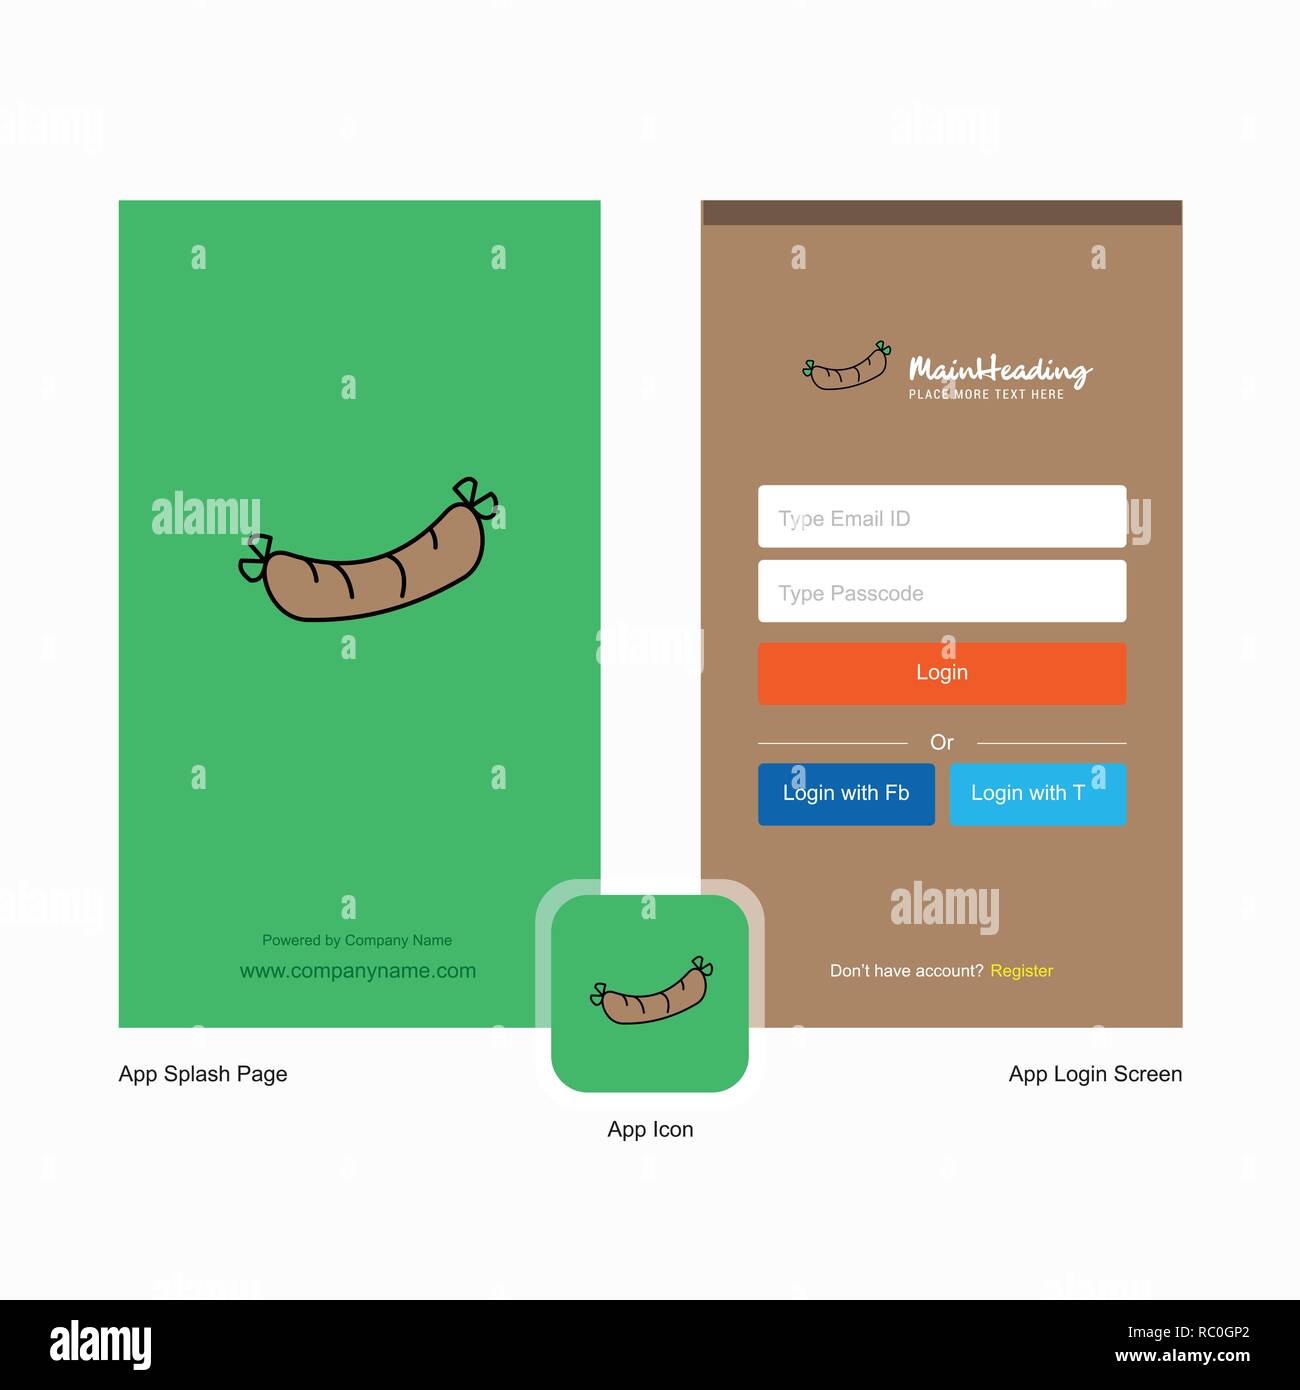 Company Hot Dog Splash Screen And Login Page Design With Logo